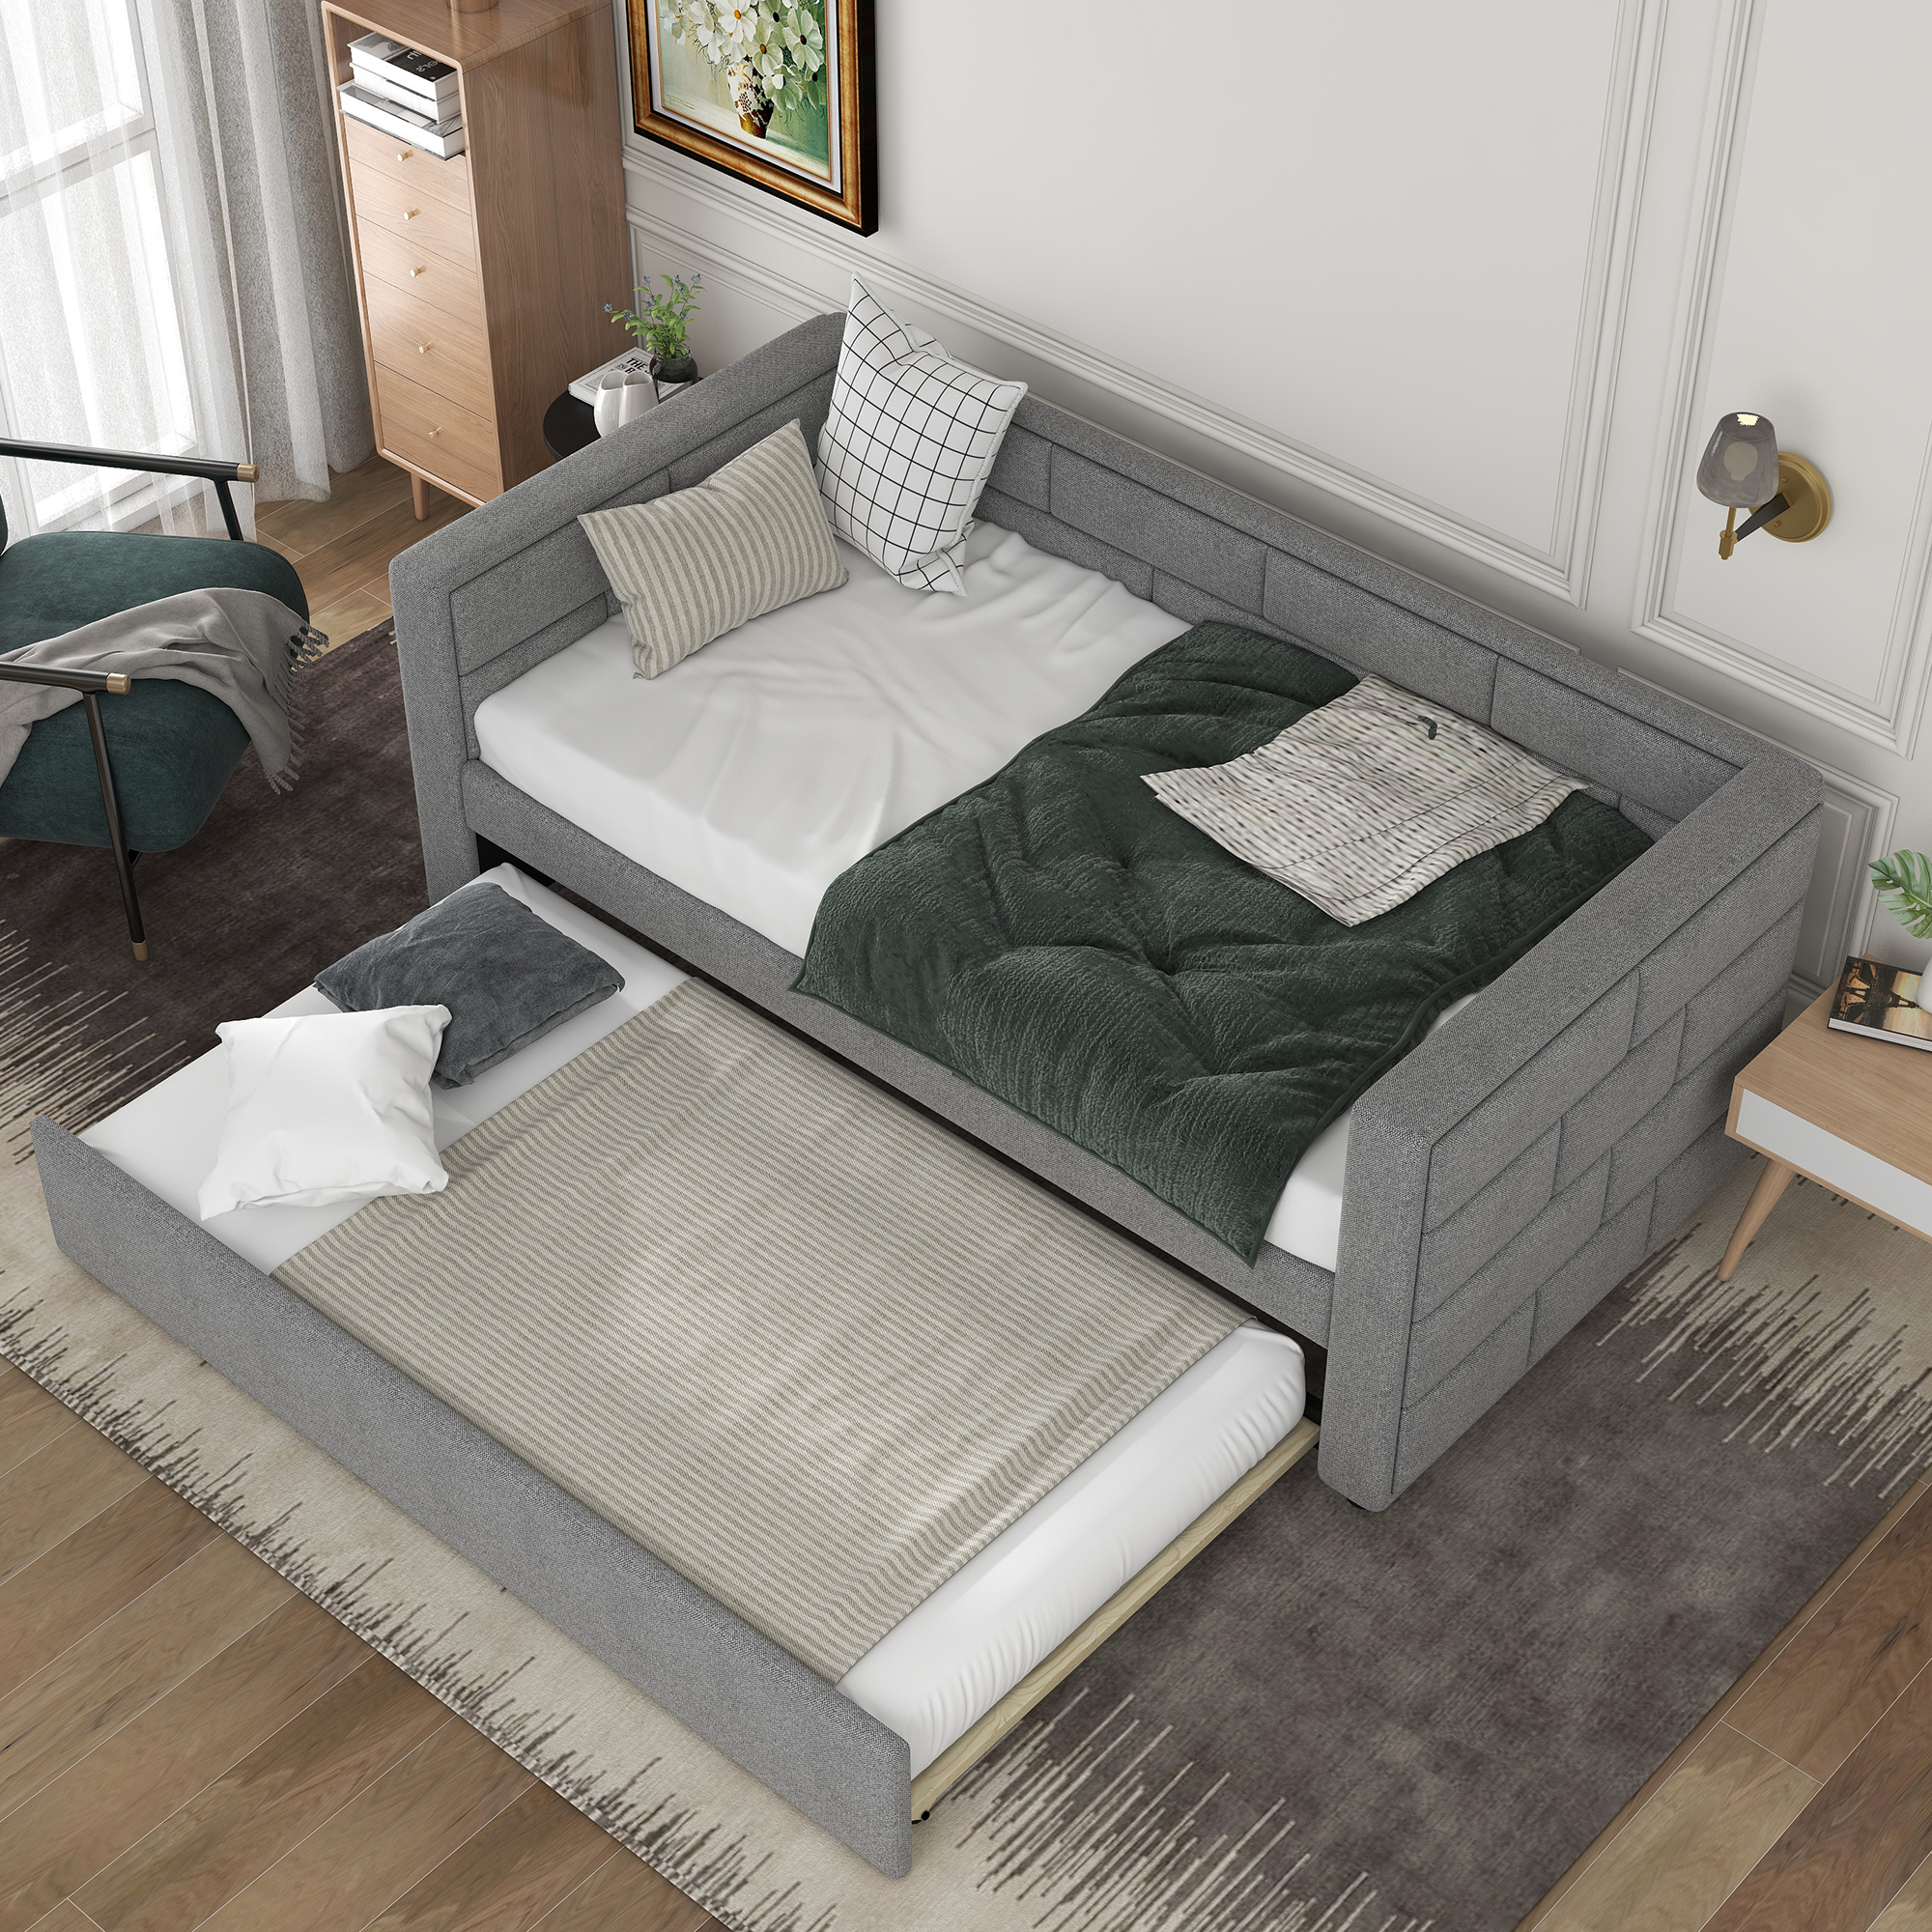 Twin Size Upholstered Daybed with Trundle and Padded Back - Bedroom Furniture - Gray - image 1 of 10